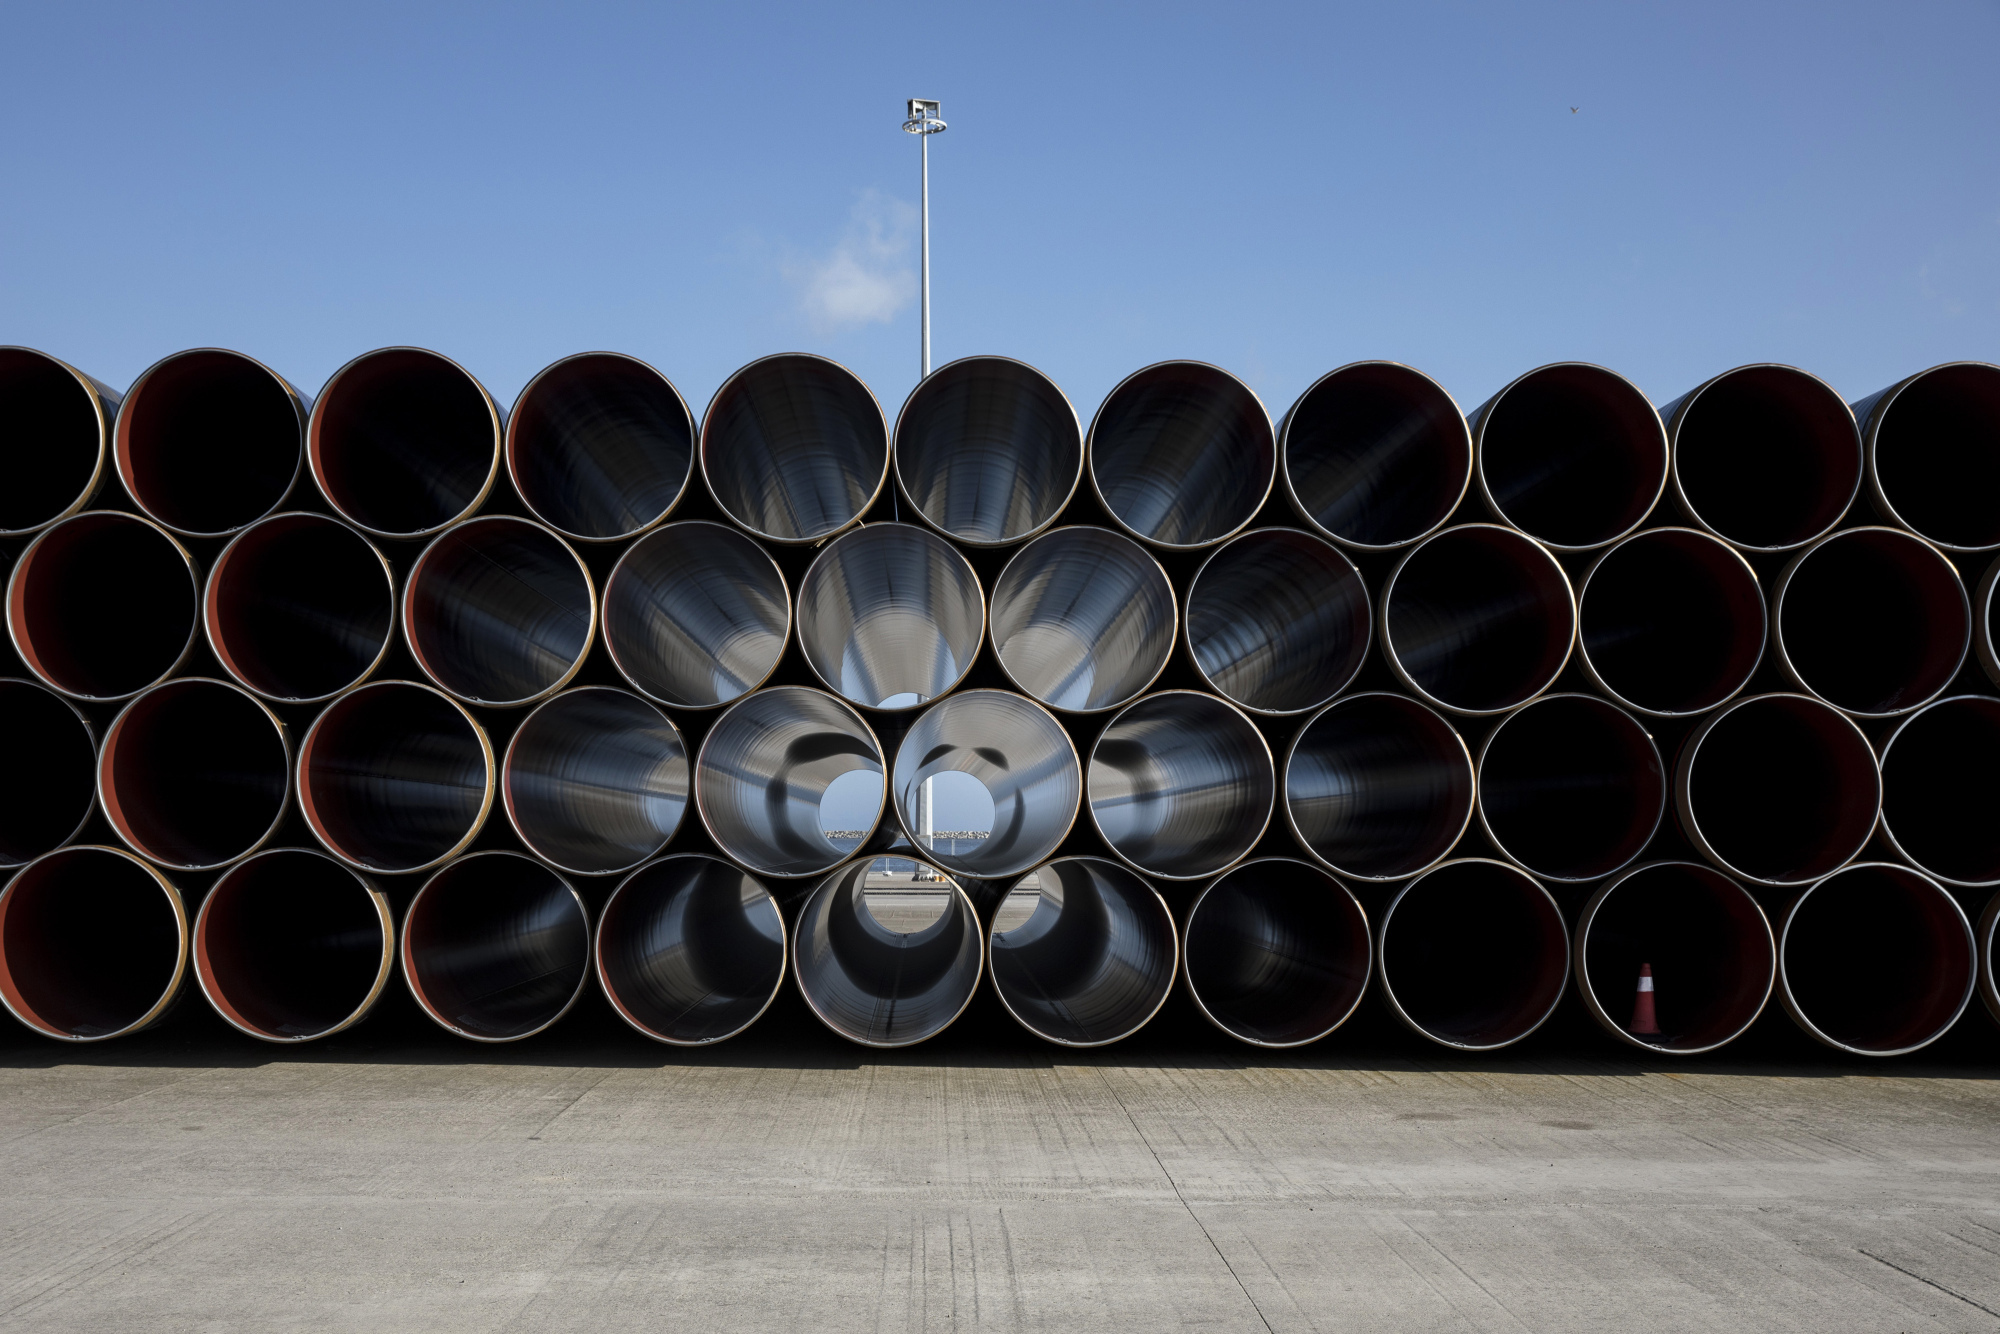 Pipe sections for the Trans Adriatic gas pipeline sit on the dockside at the cargo port of Alexandroupolis, Greece, on Feb. 23, 2017. The Trans Adriatic Pipeline AG (TAP) will transport Caspian natural gas to Europe crossing Northern Greece, Albania and the Adriatic Sea coming ashore in Southern Italy to connect the Italian gas network to the Trans Anatolian Pipeline (TANAP). Photographer: Konstantinos Tsakalidis/Bloomberg